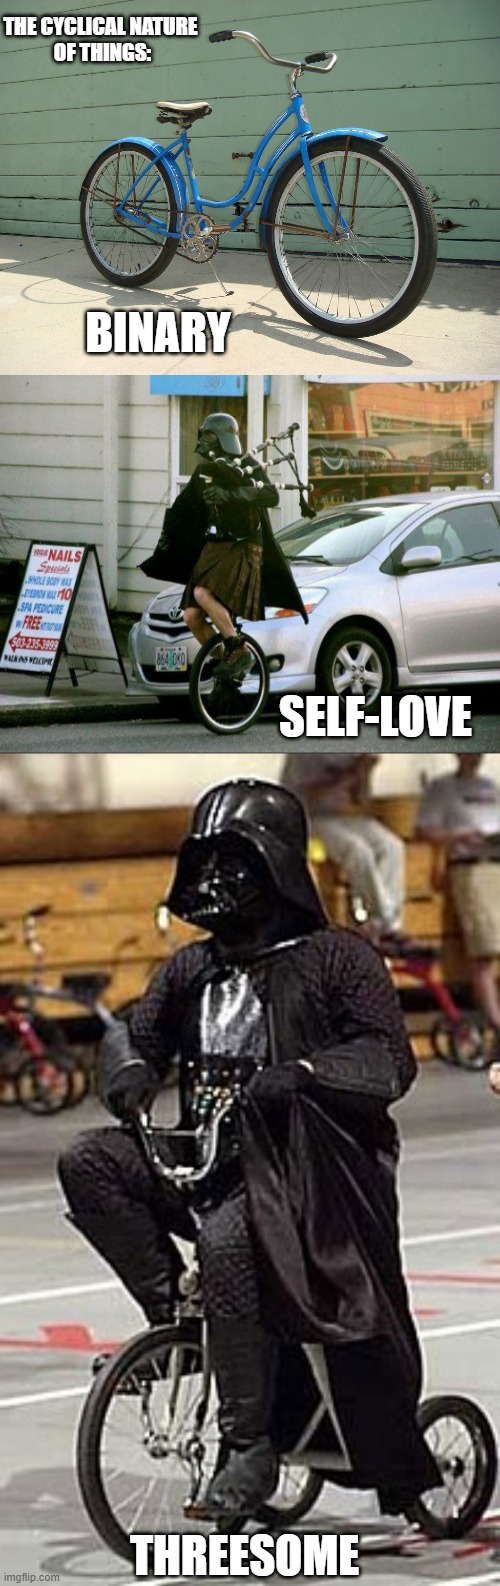 TRANSMANIA | THE CYCLICAL NATURE 
OF THINGS:; BINARY; SELF-LOVE; THREESOME | image tagged in bicycle,darth vader trike,transgender,cultural marxism,bill clinton - sexual relations,bud light | made w/ Imgflip meme maker